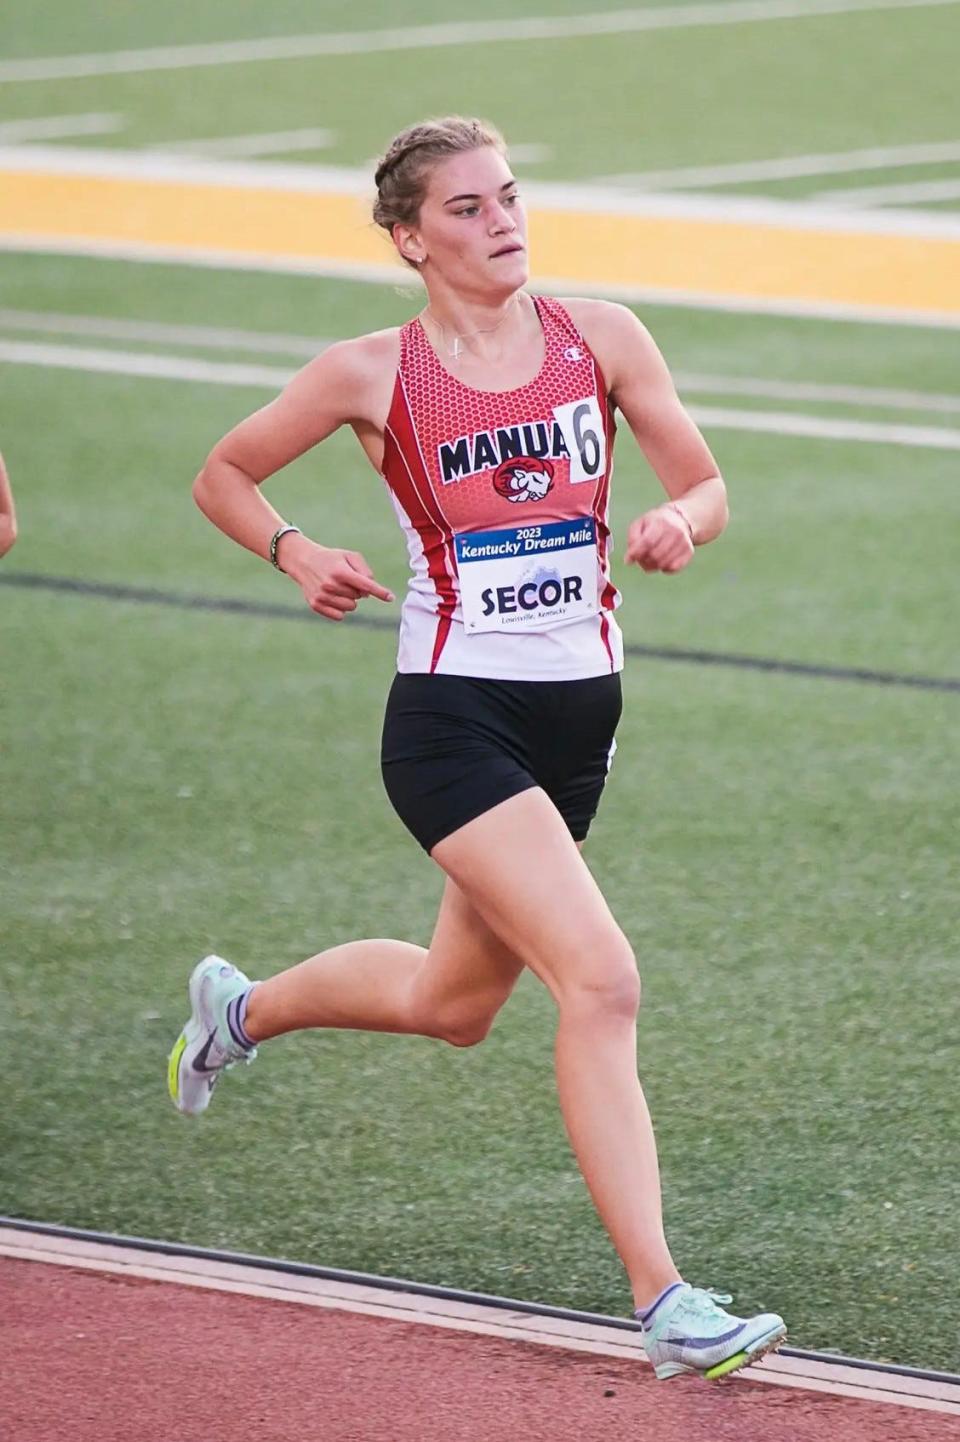 Manual senior distance runner Jessie Secor broke the Kentucky high school mile record on May 5, 2023, in the Kentucky Dream Mile at St. Xavier High School.